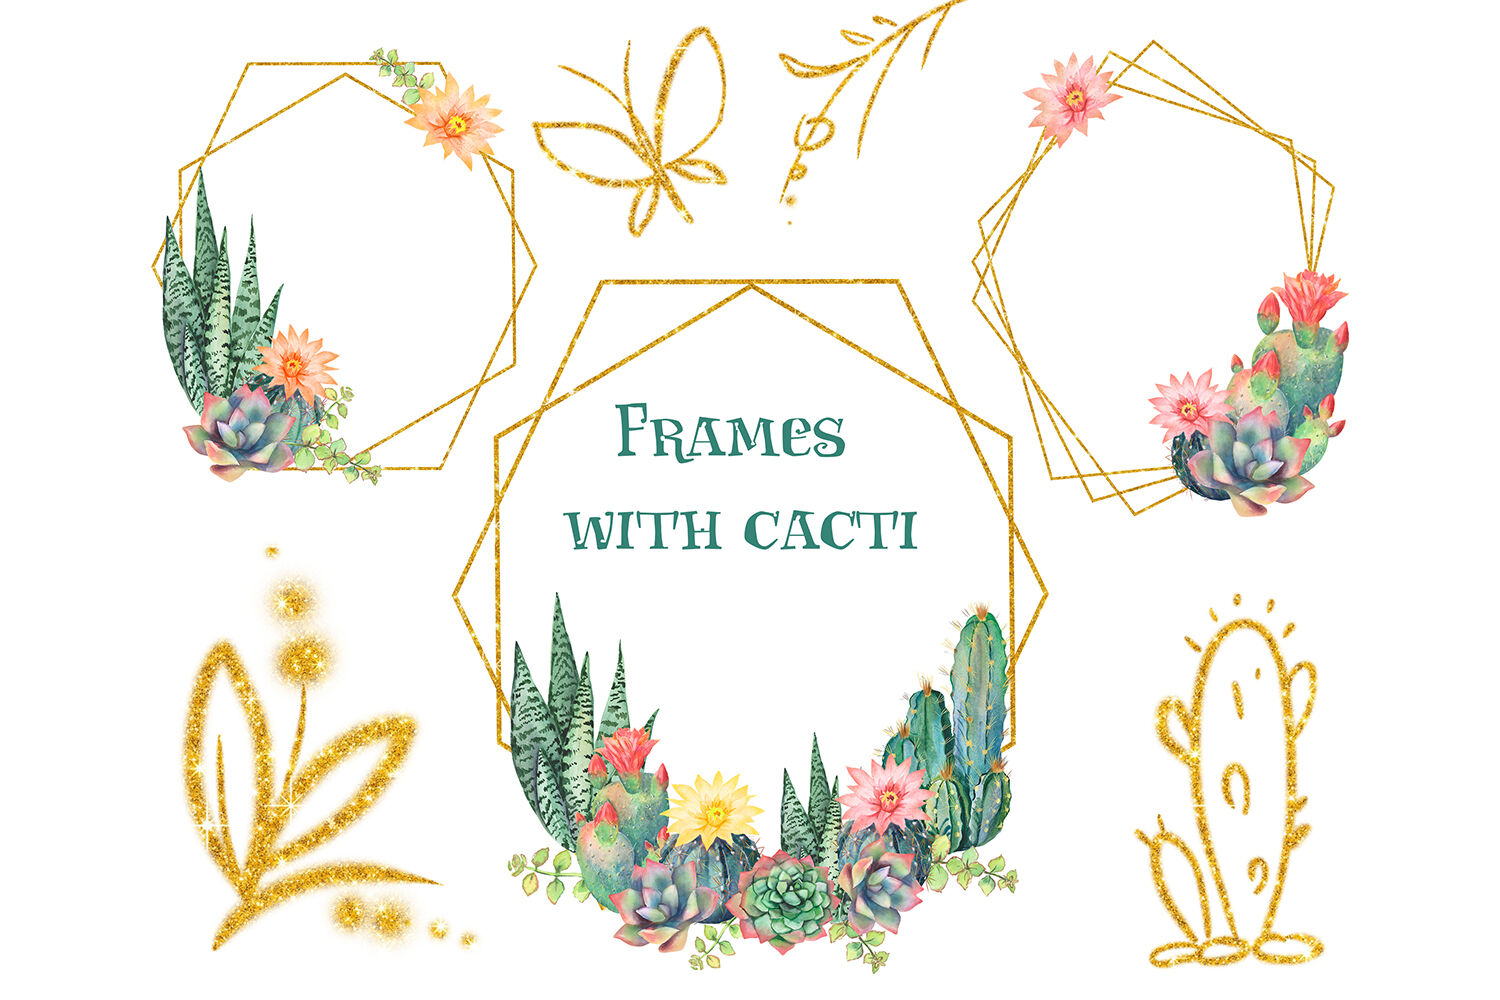 Floral Frames With Cacti Watercolor Flowers Cacti Frames For Cards By Evgeniia Grebneva Painting Thehungryjpeg Com